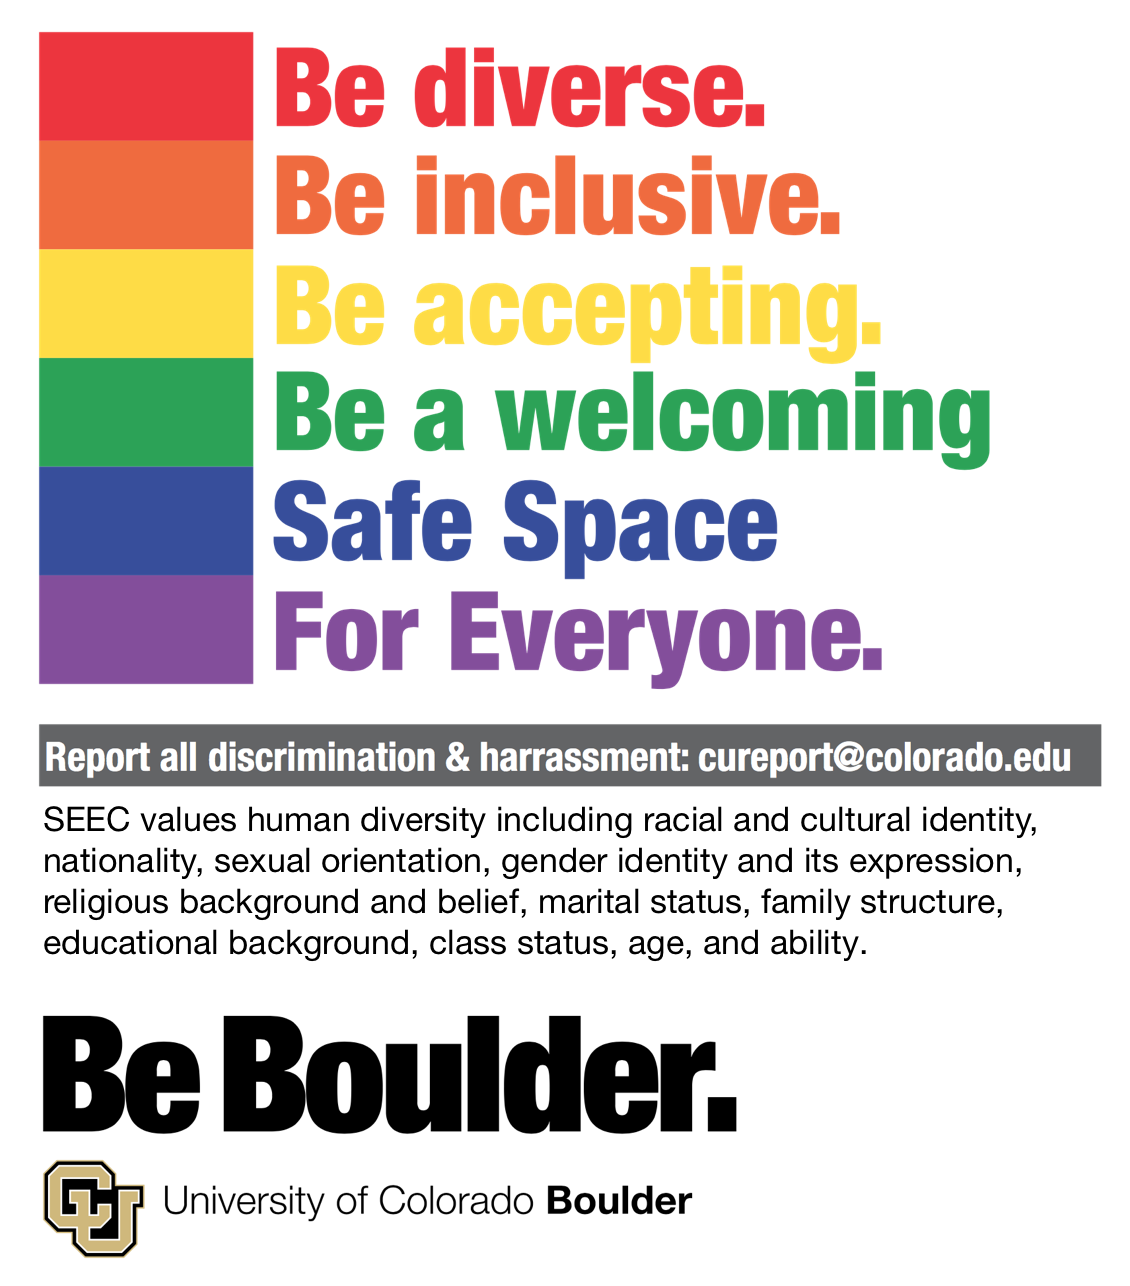 Be diverse. Be inclusive. Be accepting. Be a welcoming Safe Space For Everyone. Be Boulder.